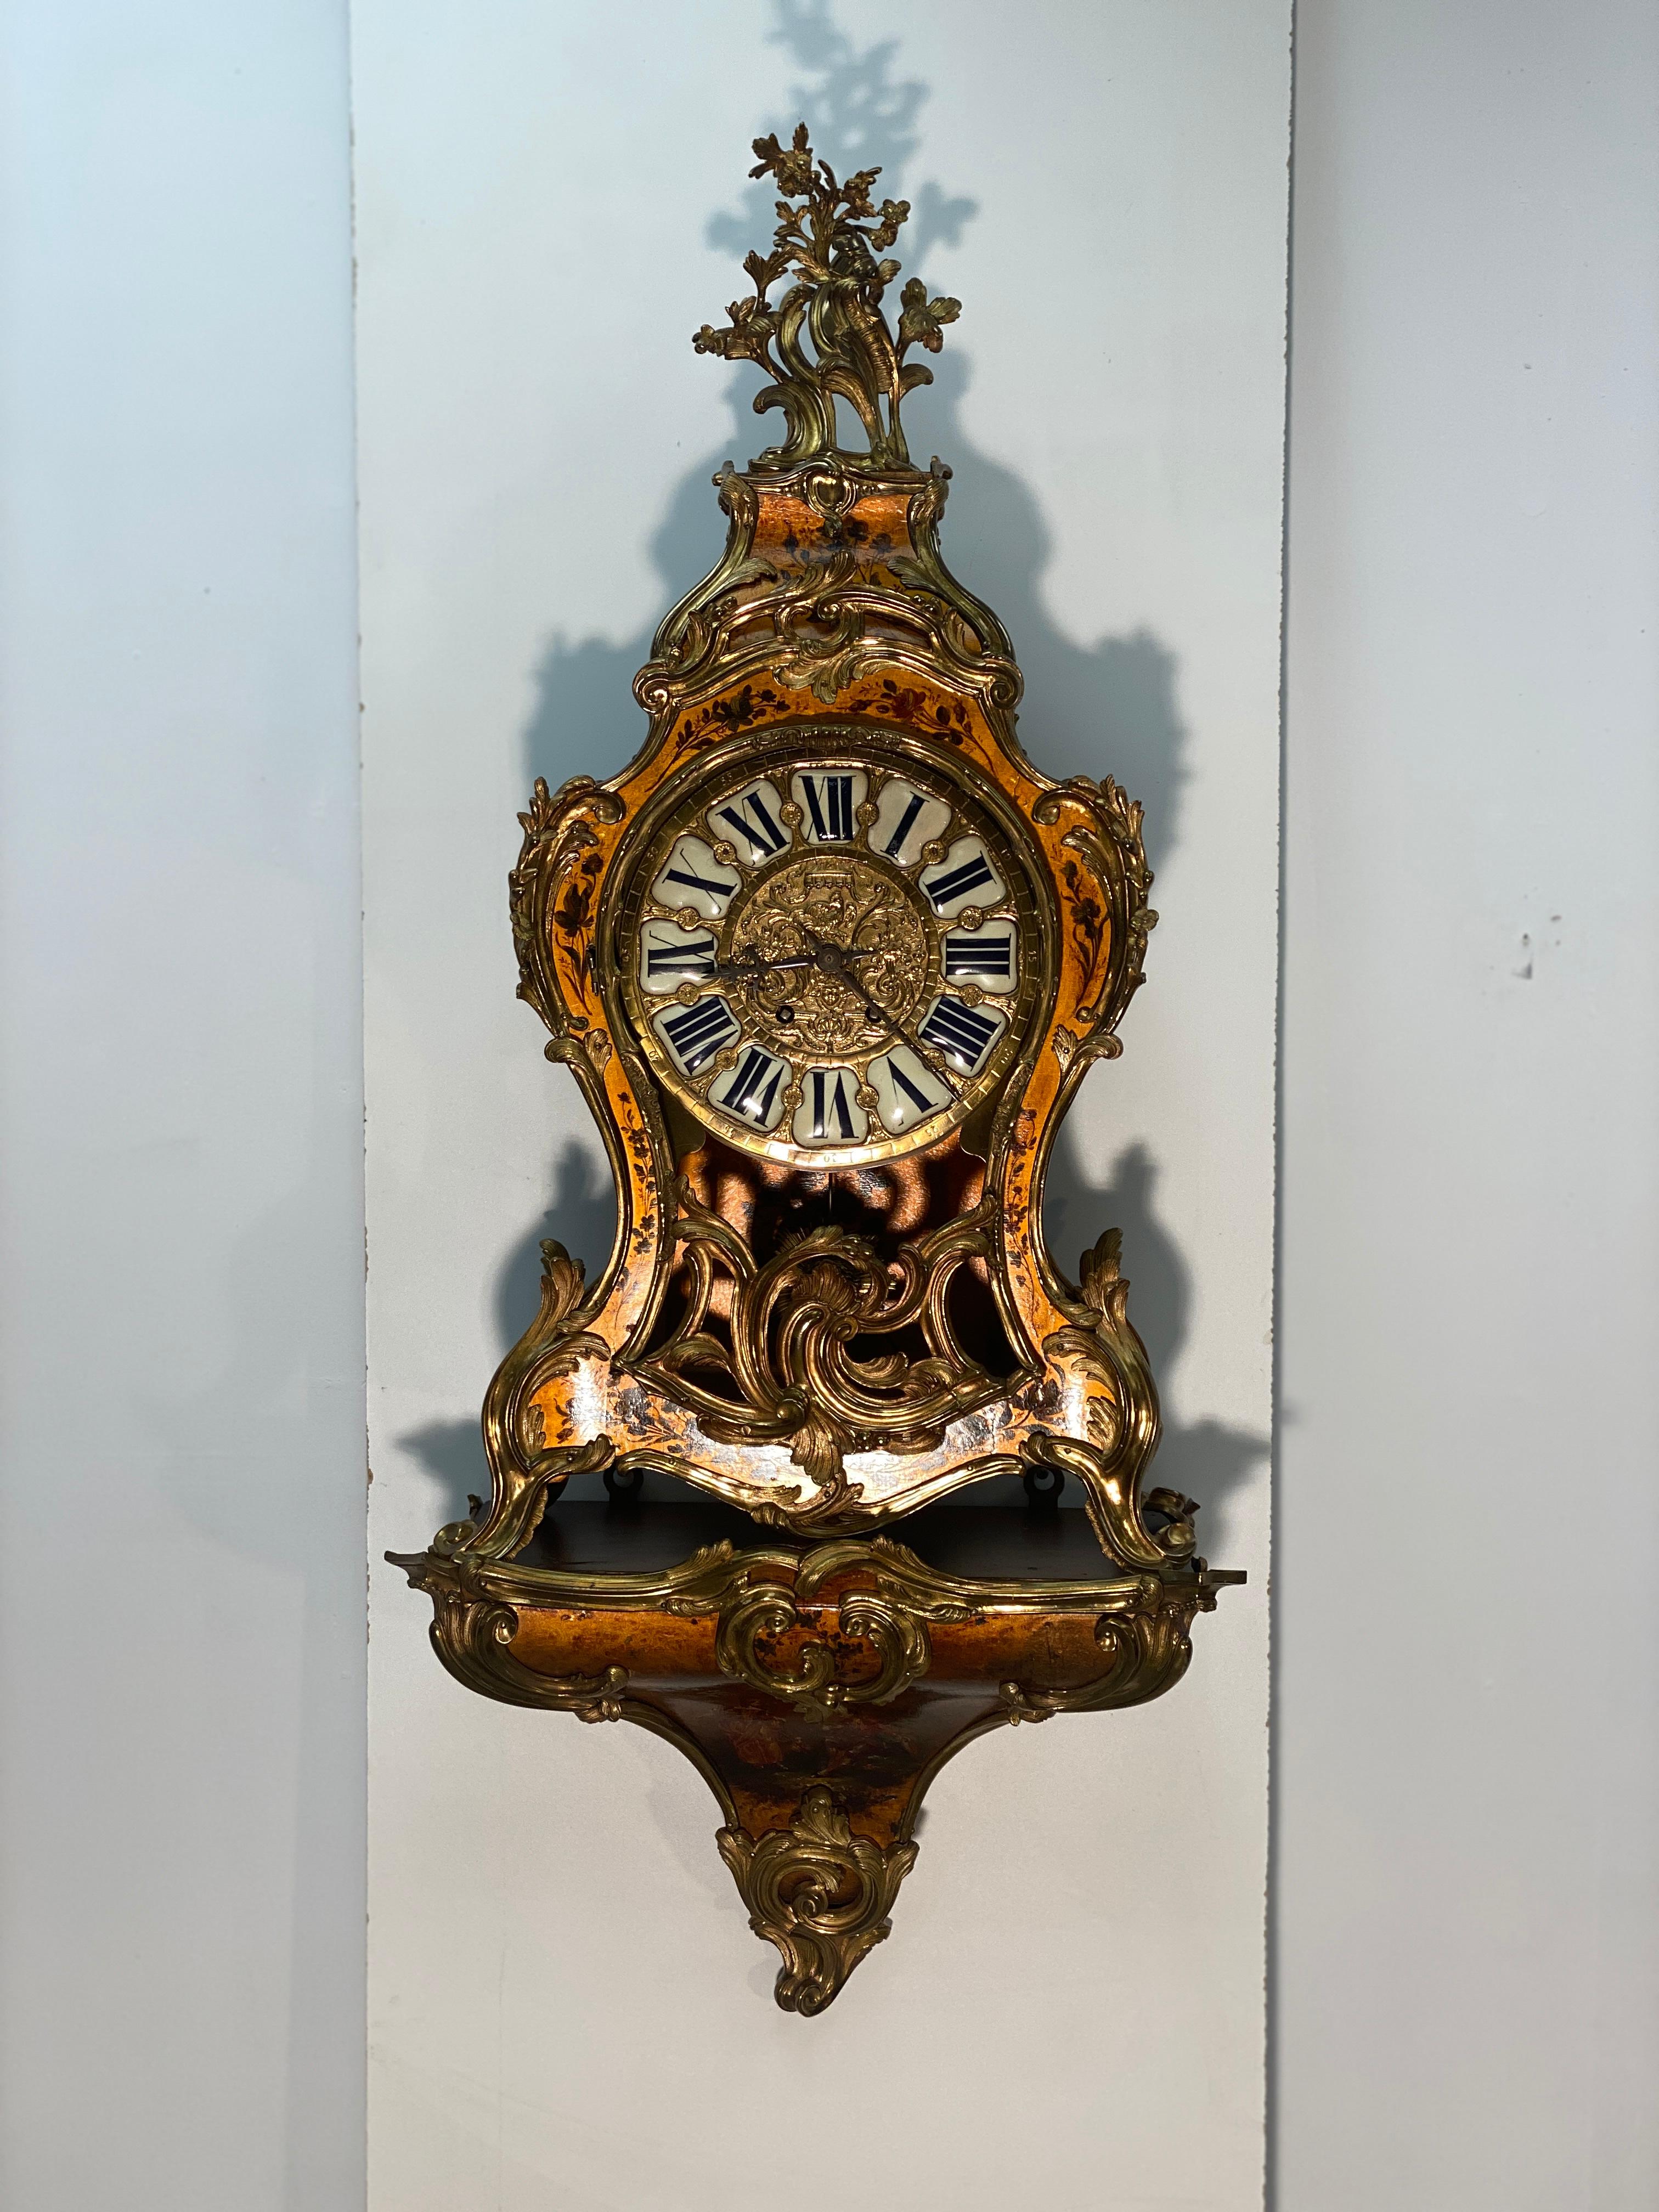 Very ornate large 19th century French mantle clock. Three sections. The bracket mounts to the wall with two eyelets on the rear. The main clock and the bonnet rest upon this bracket. The clock could also be displayed by itself without the bracket.